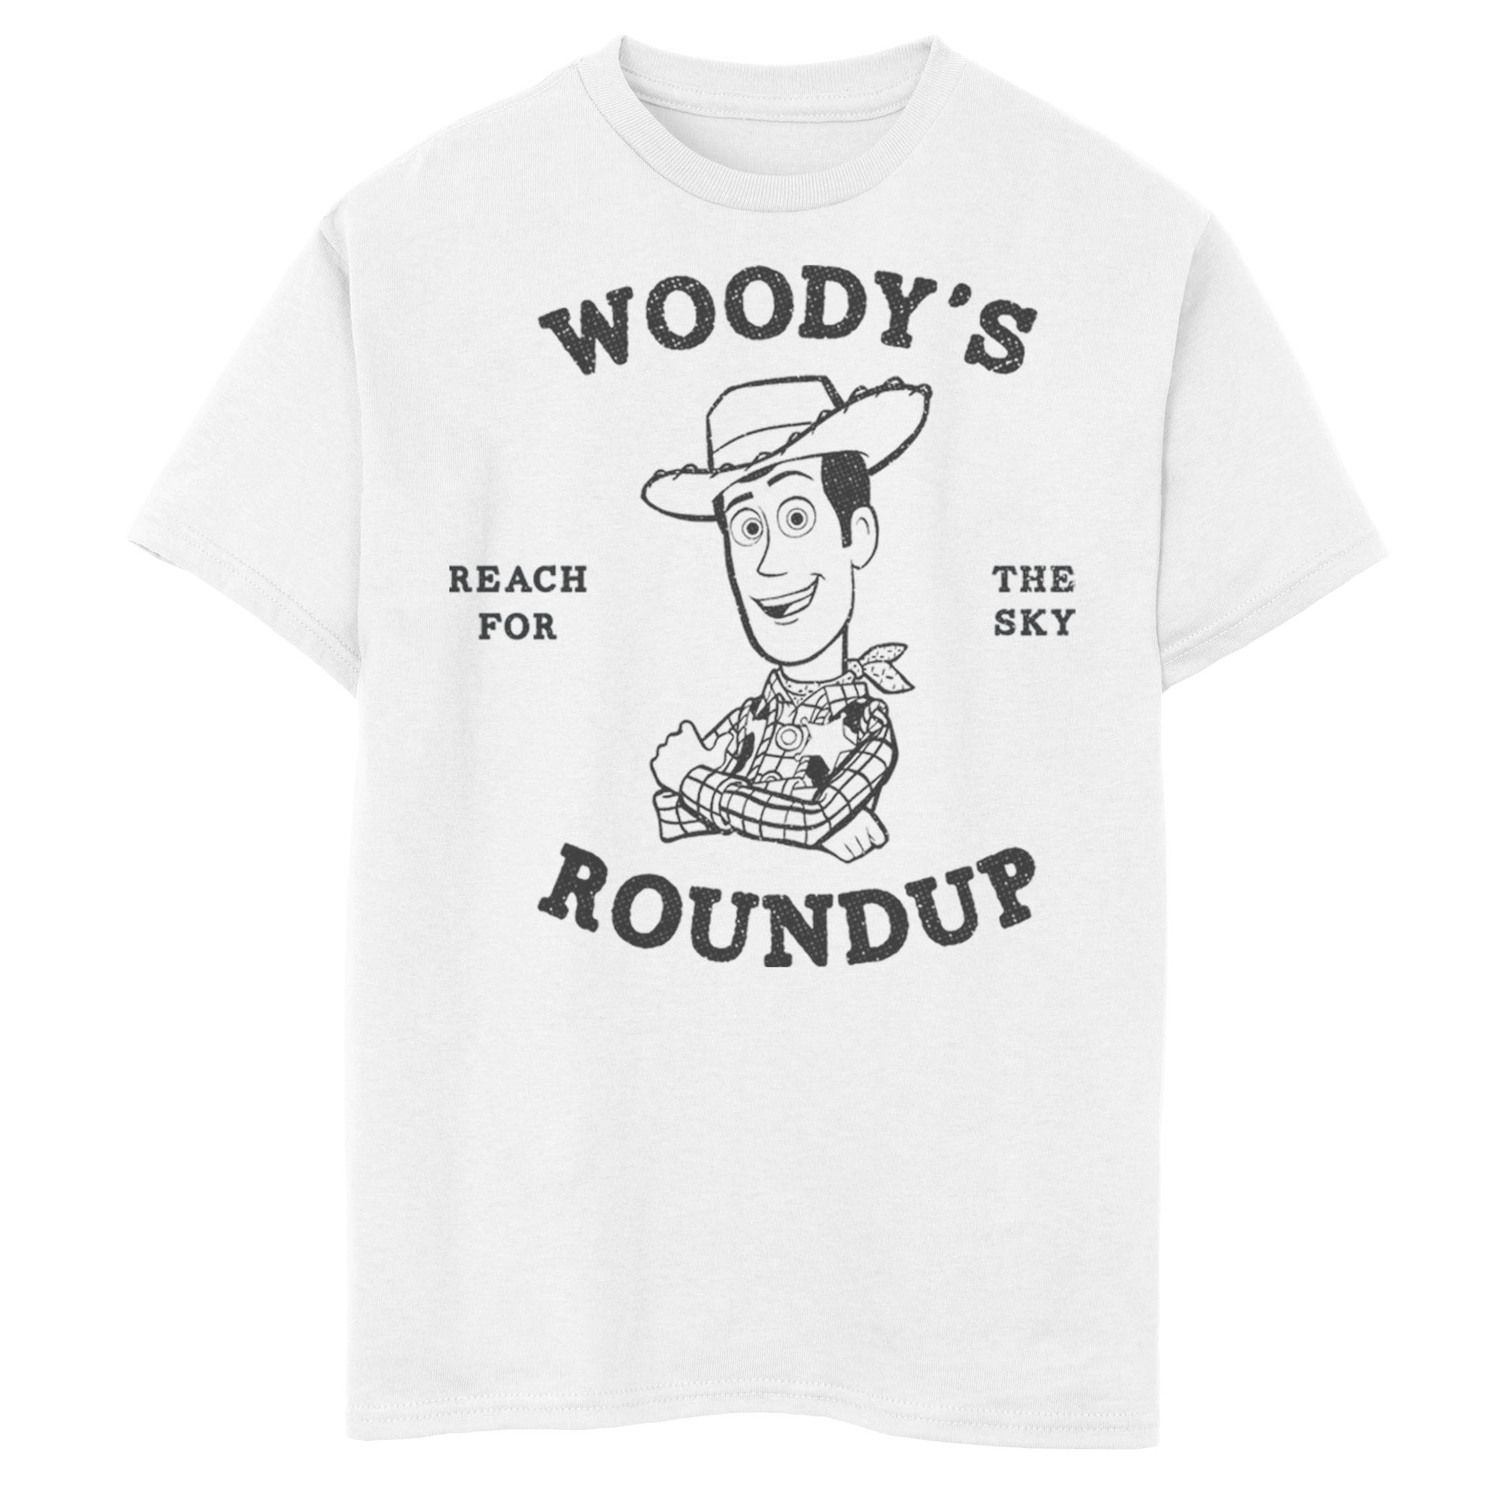 Image for Disney / Pixar Toy Story Boys 8-20 Woody's Roundup Outline Sketch Graphic Tee at Kohl's.